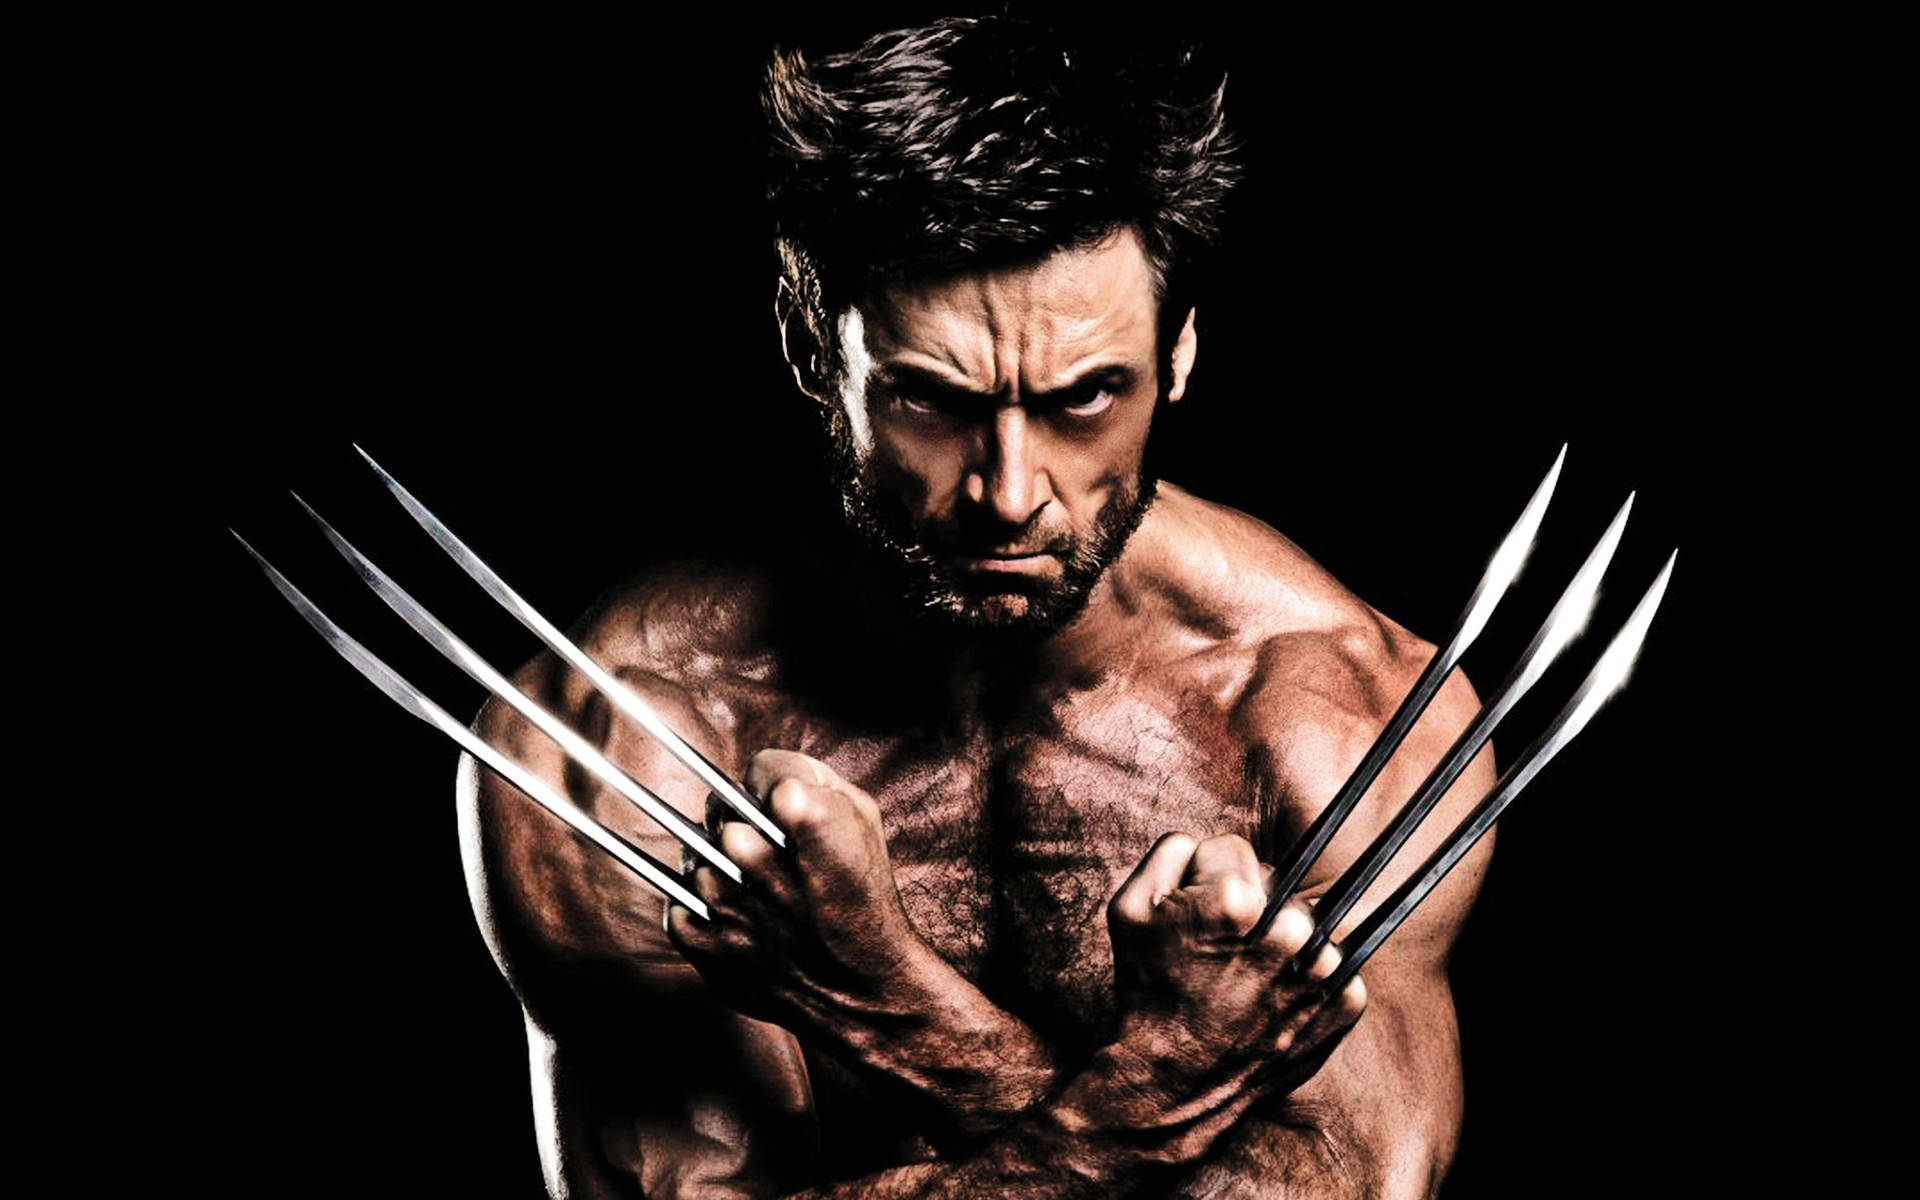 Free Wolverine Wallpaper Downloads, [100+] Wolverine Wallpapers for FREE |  